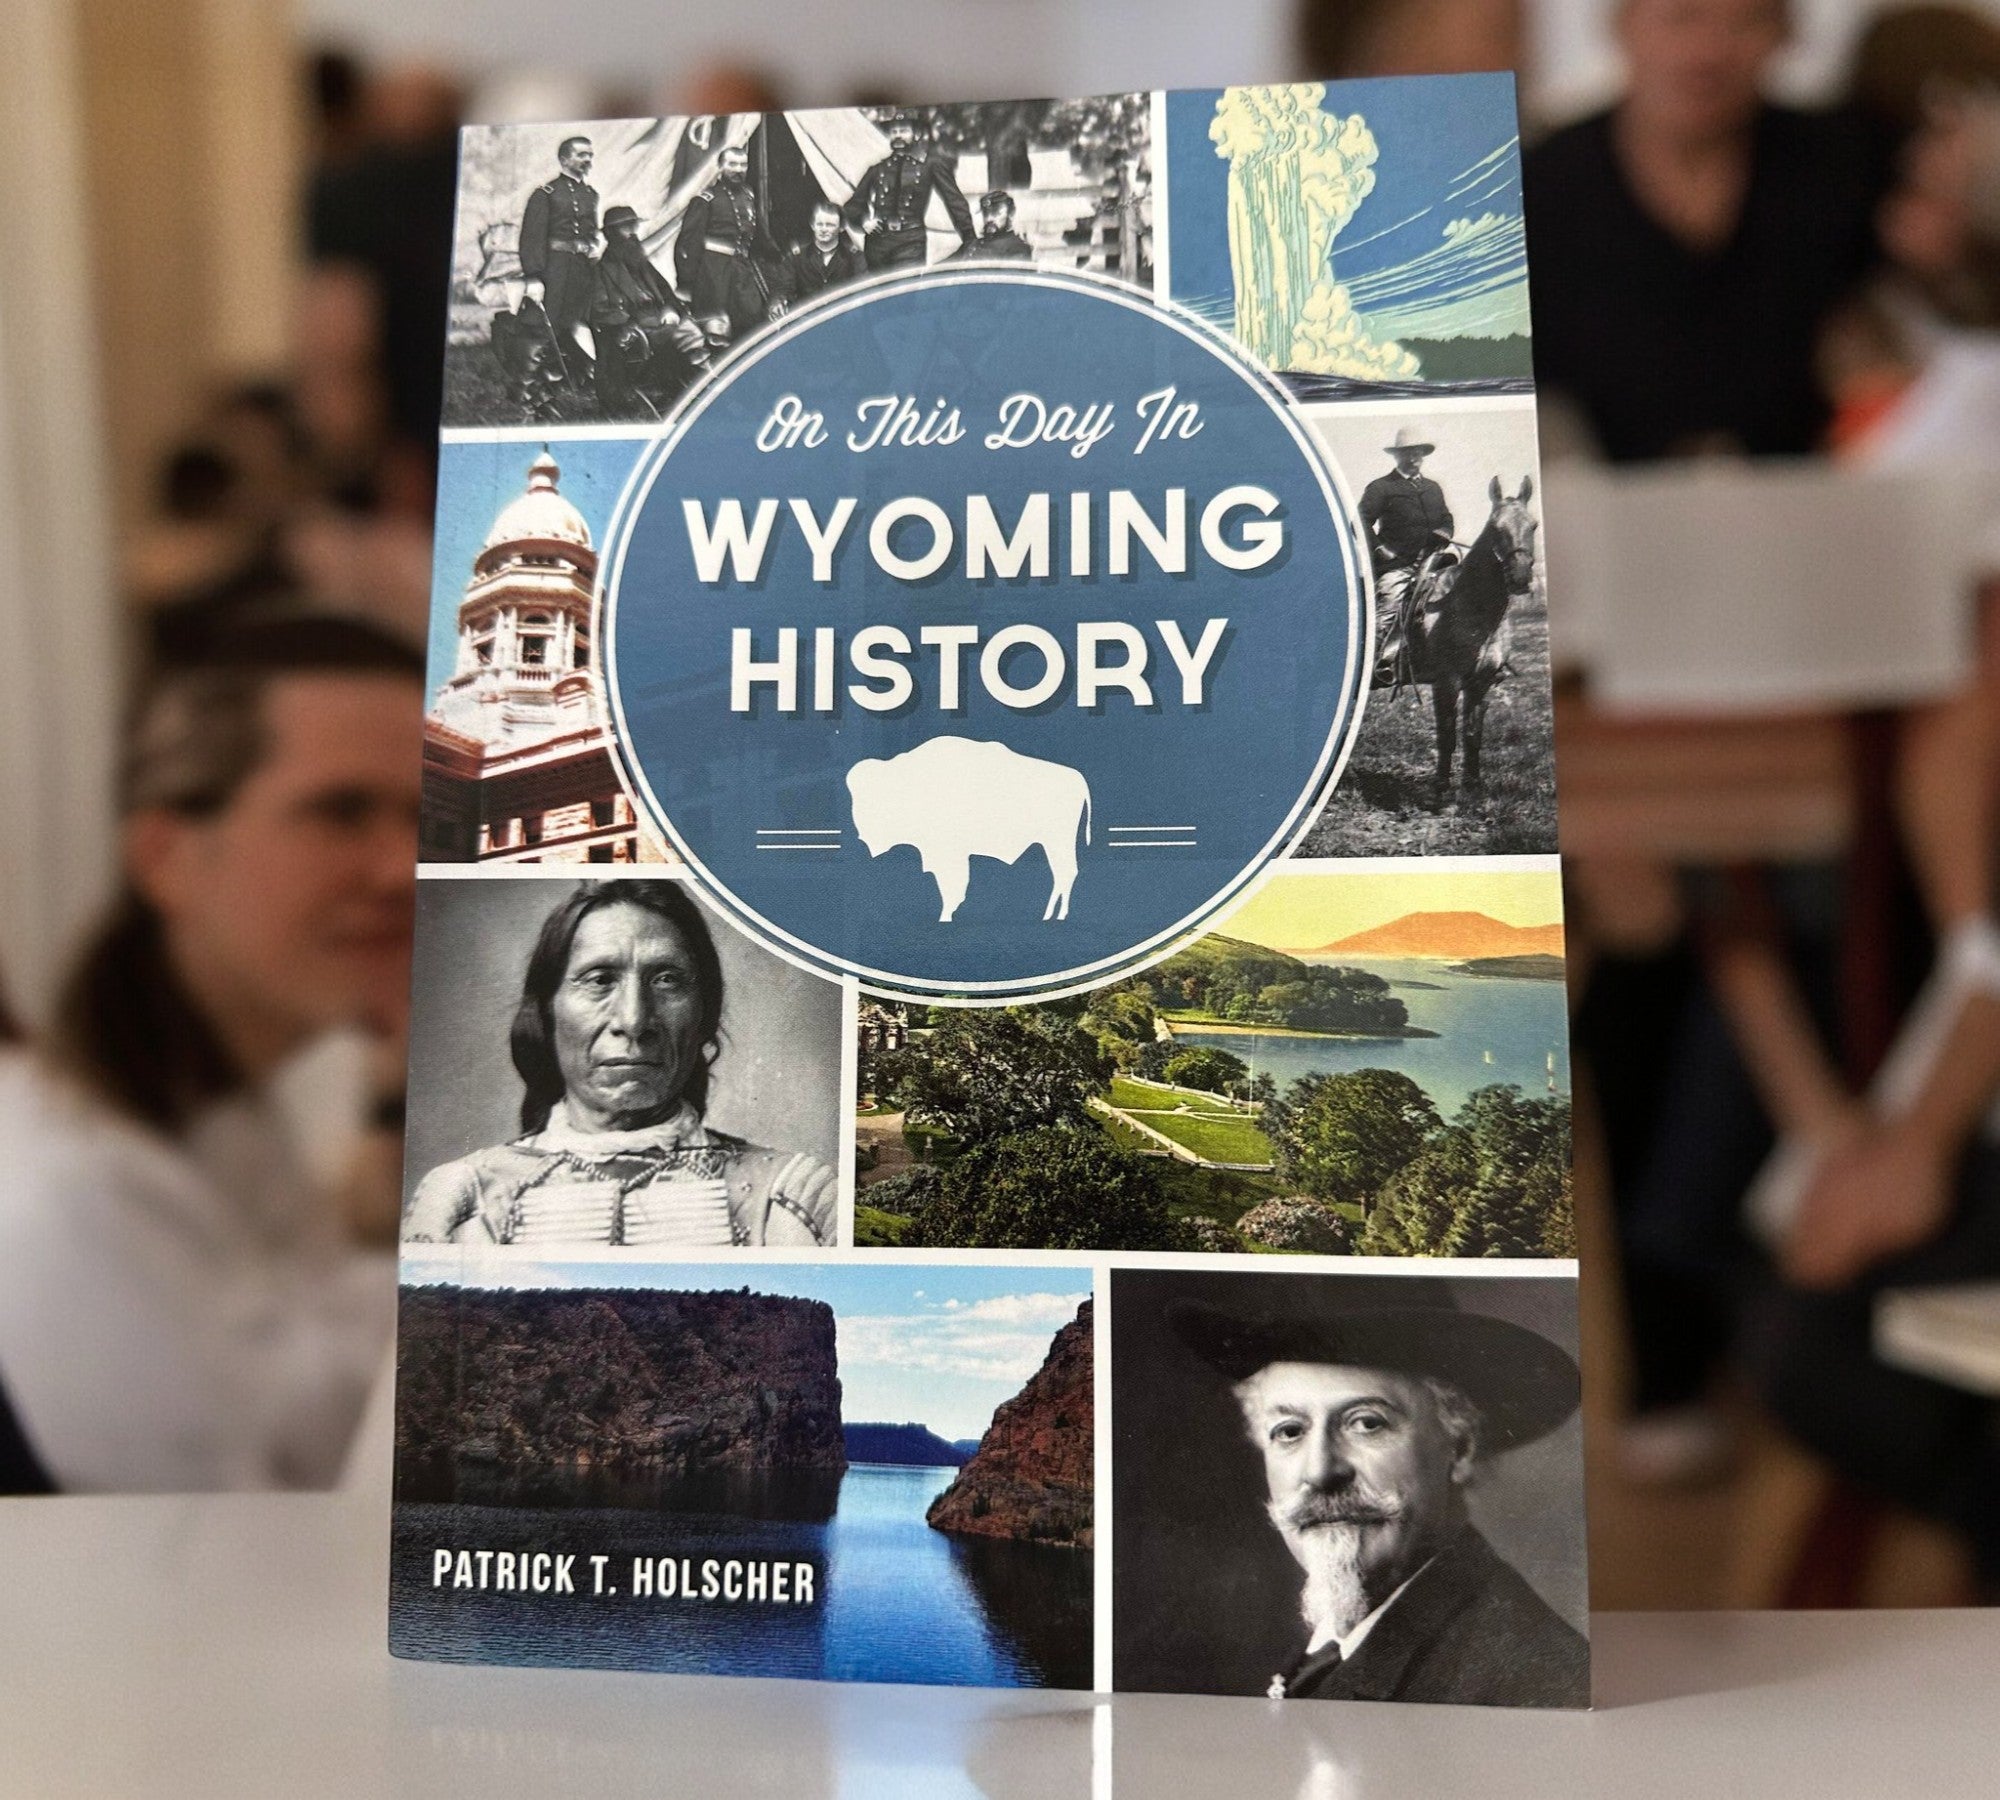 On this Day in Wyoming History